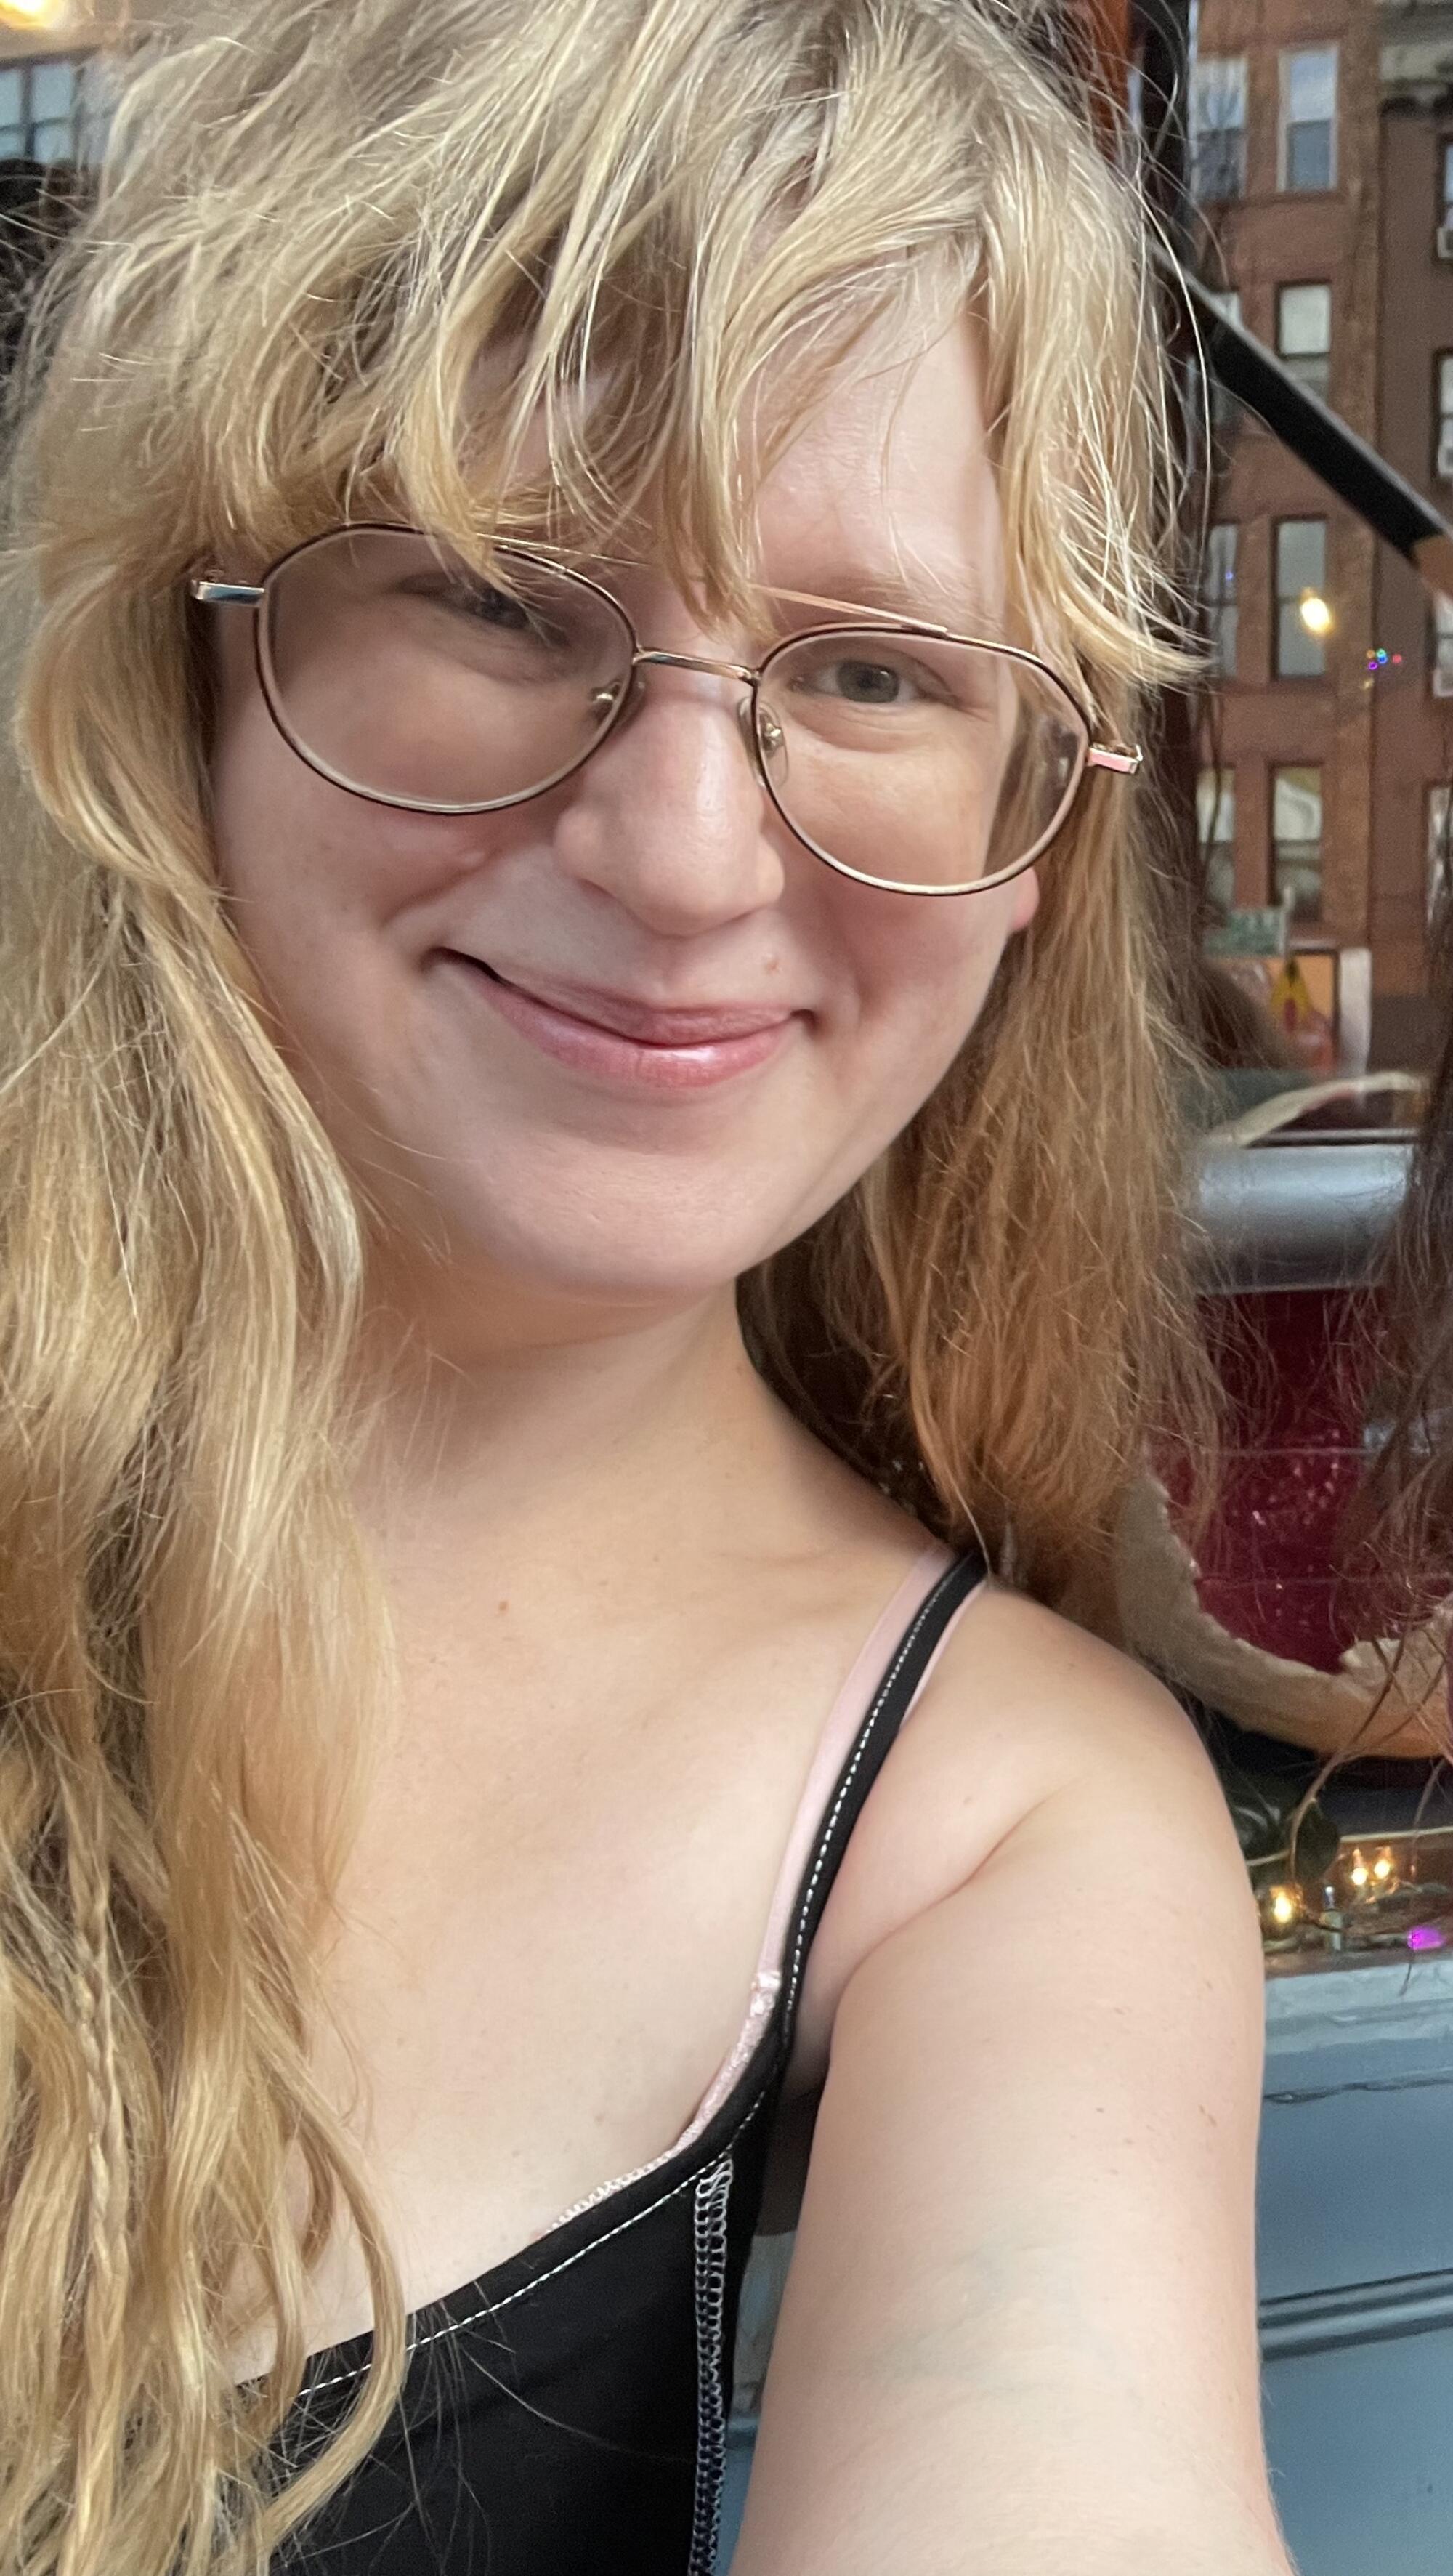 A selfie of a blond woman with glasses.